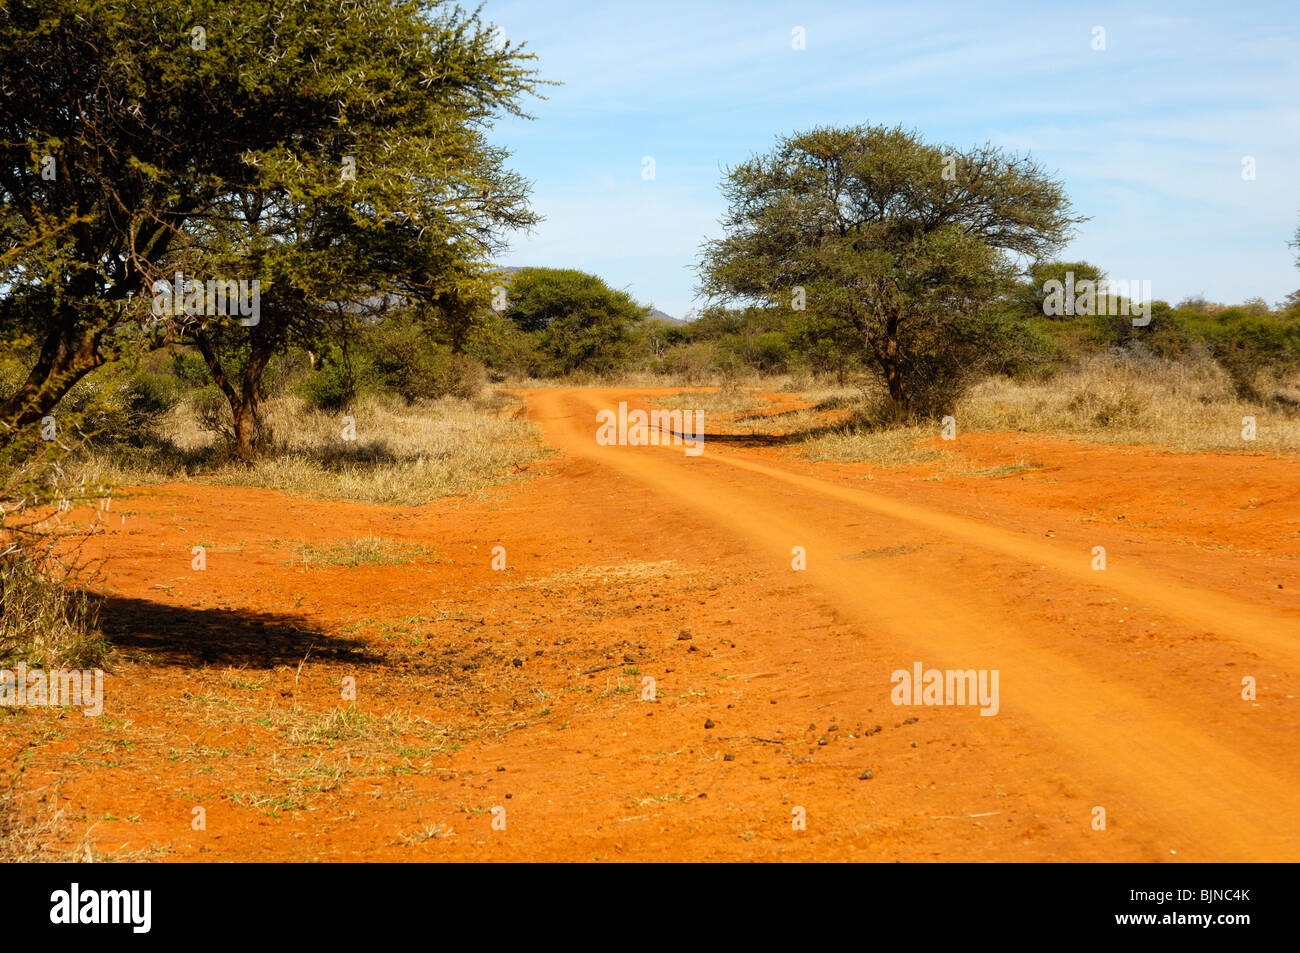 Red-brown laterite soil with typical bush landscape and dirt road in the Madikwe Game Reserve, South Africa Stock Photo